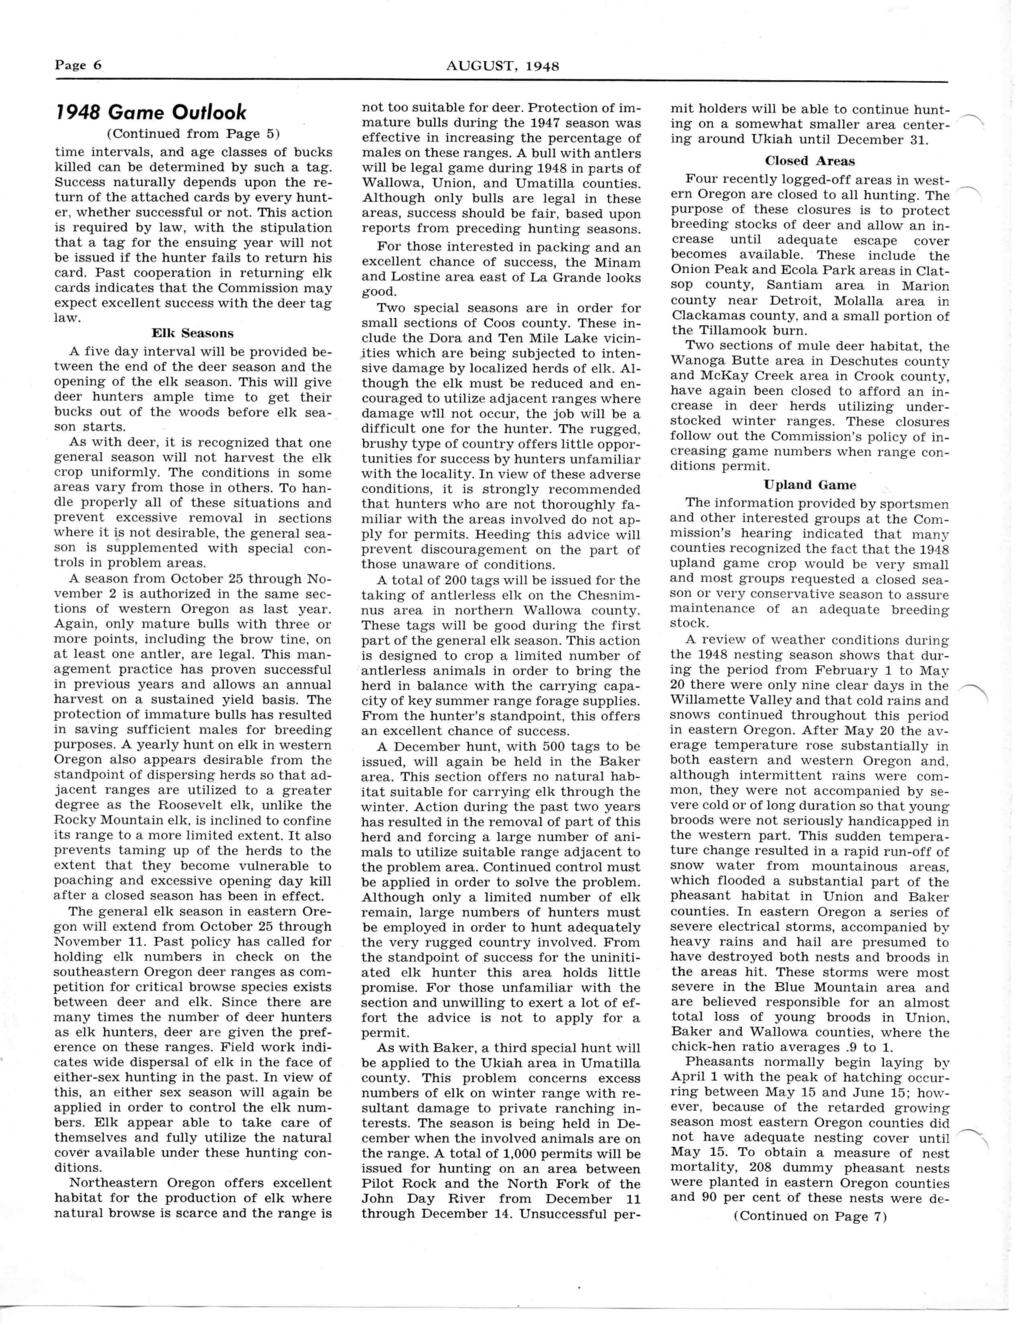 Page 6 AUGUST, 1948 7948 Game Outlook (Continued from Page 5) time intervals, and age classes of bucks killed can be determined by such a tag.